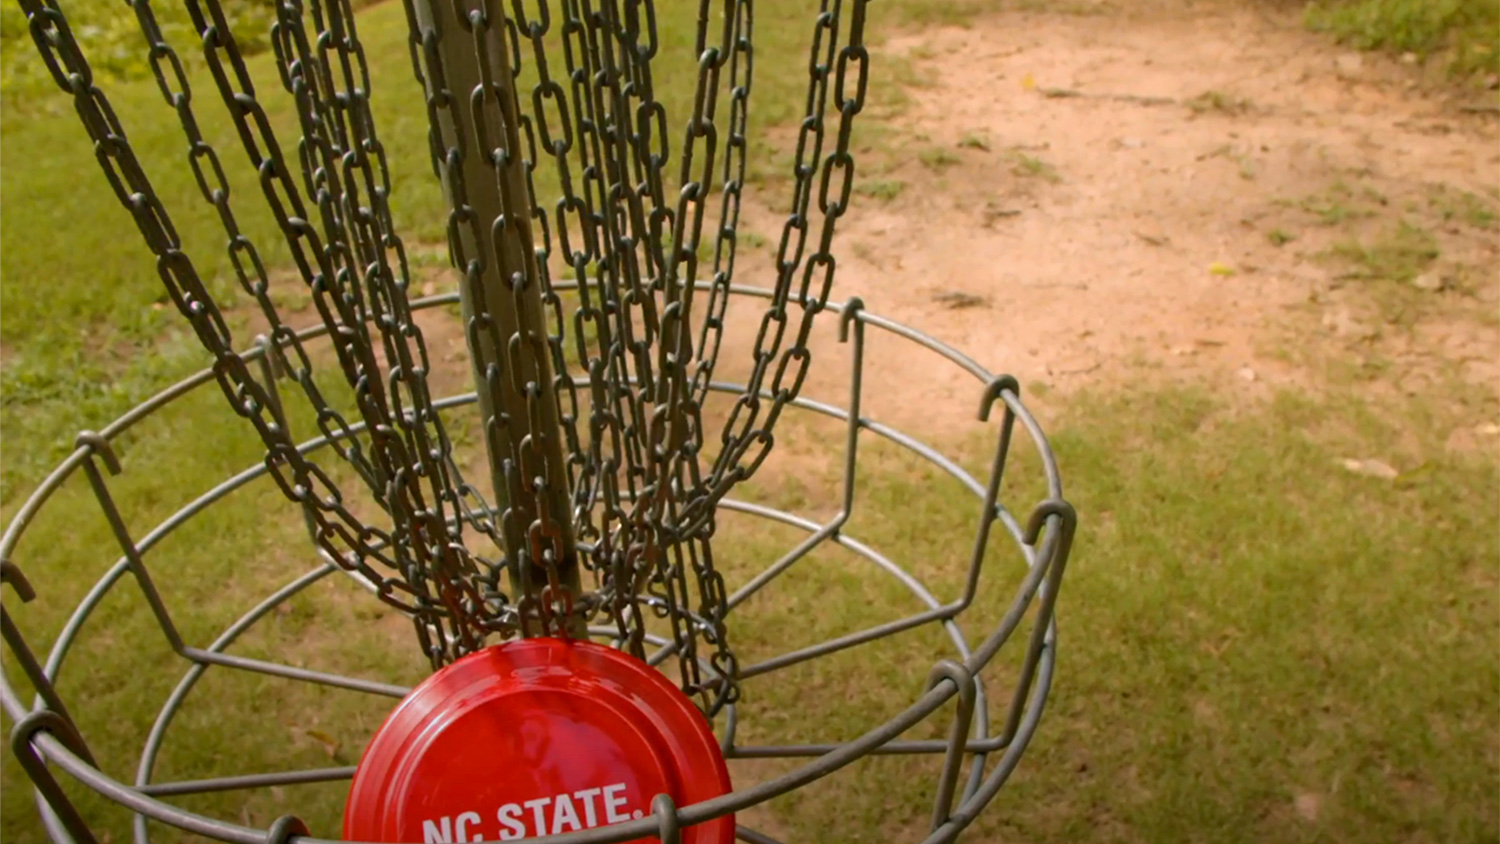 A red NC State frisbee sits in a metal disc golf basket.